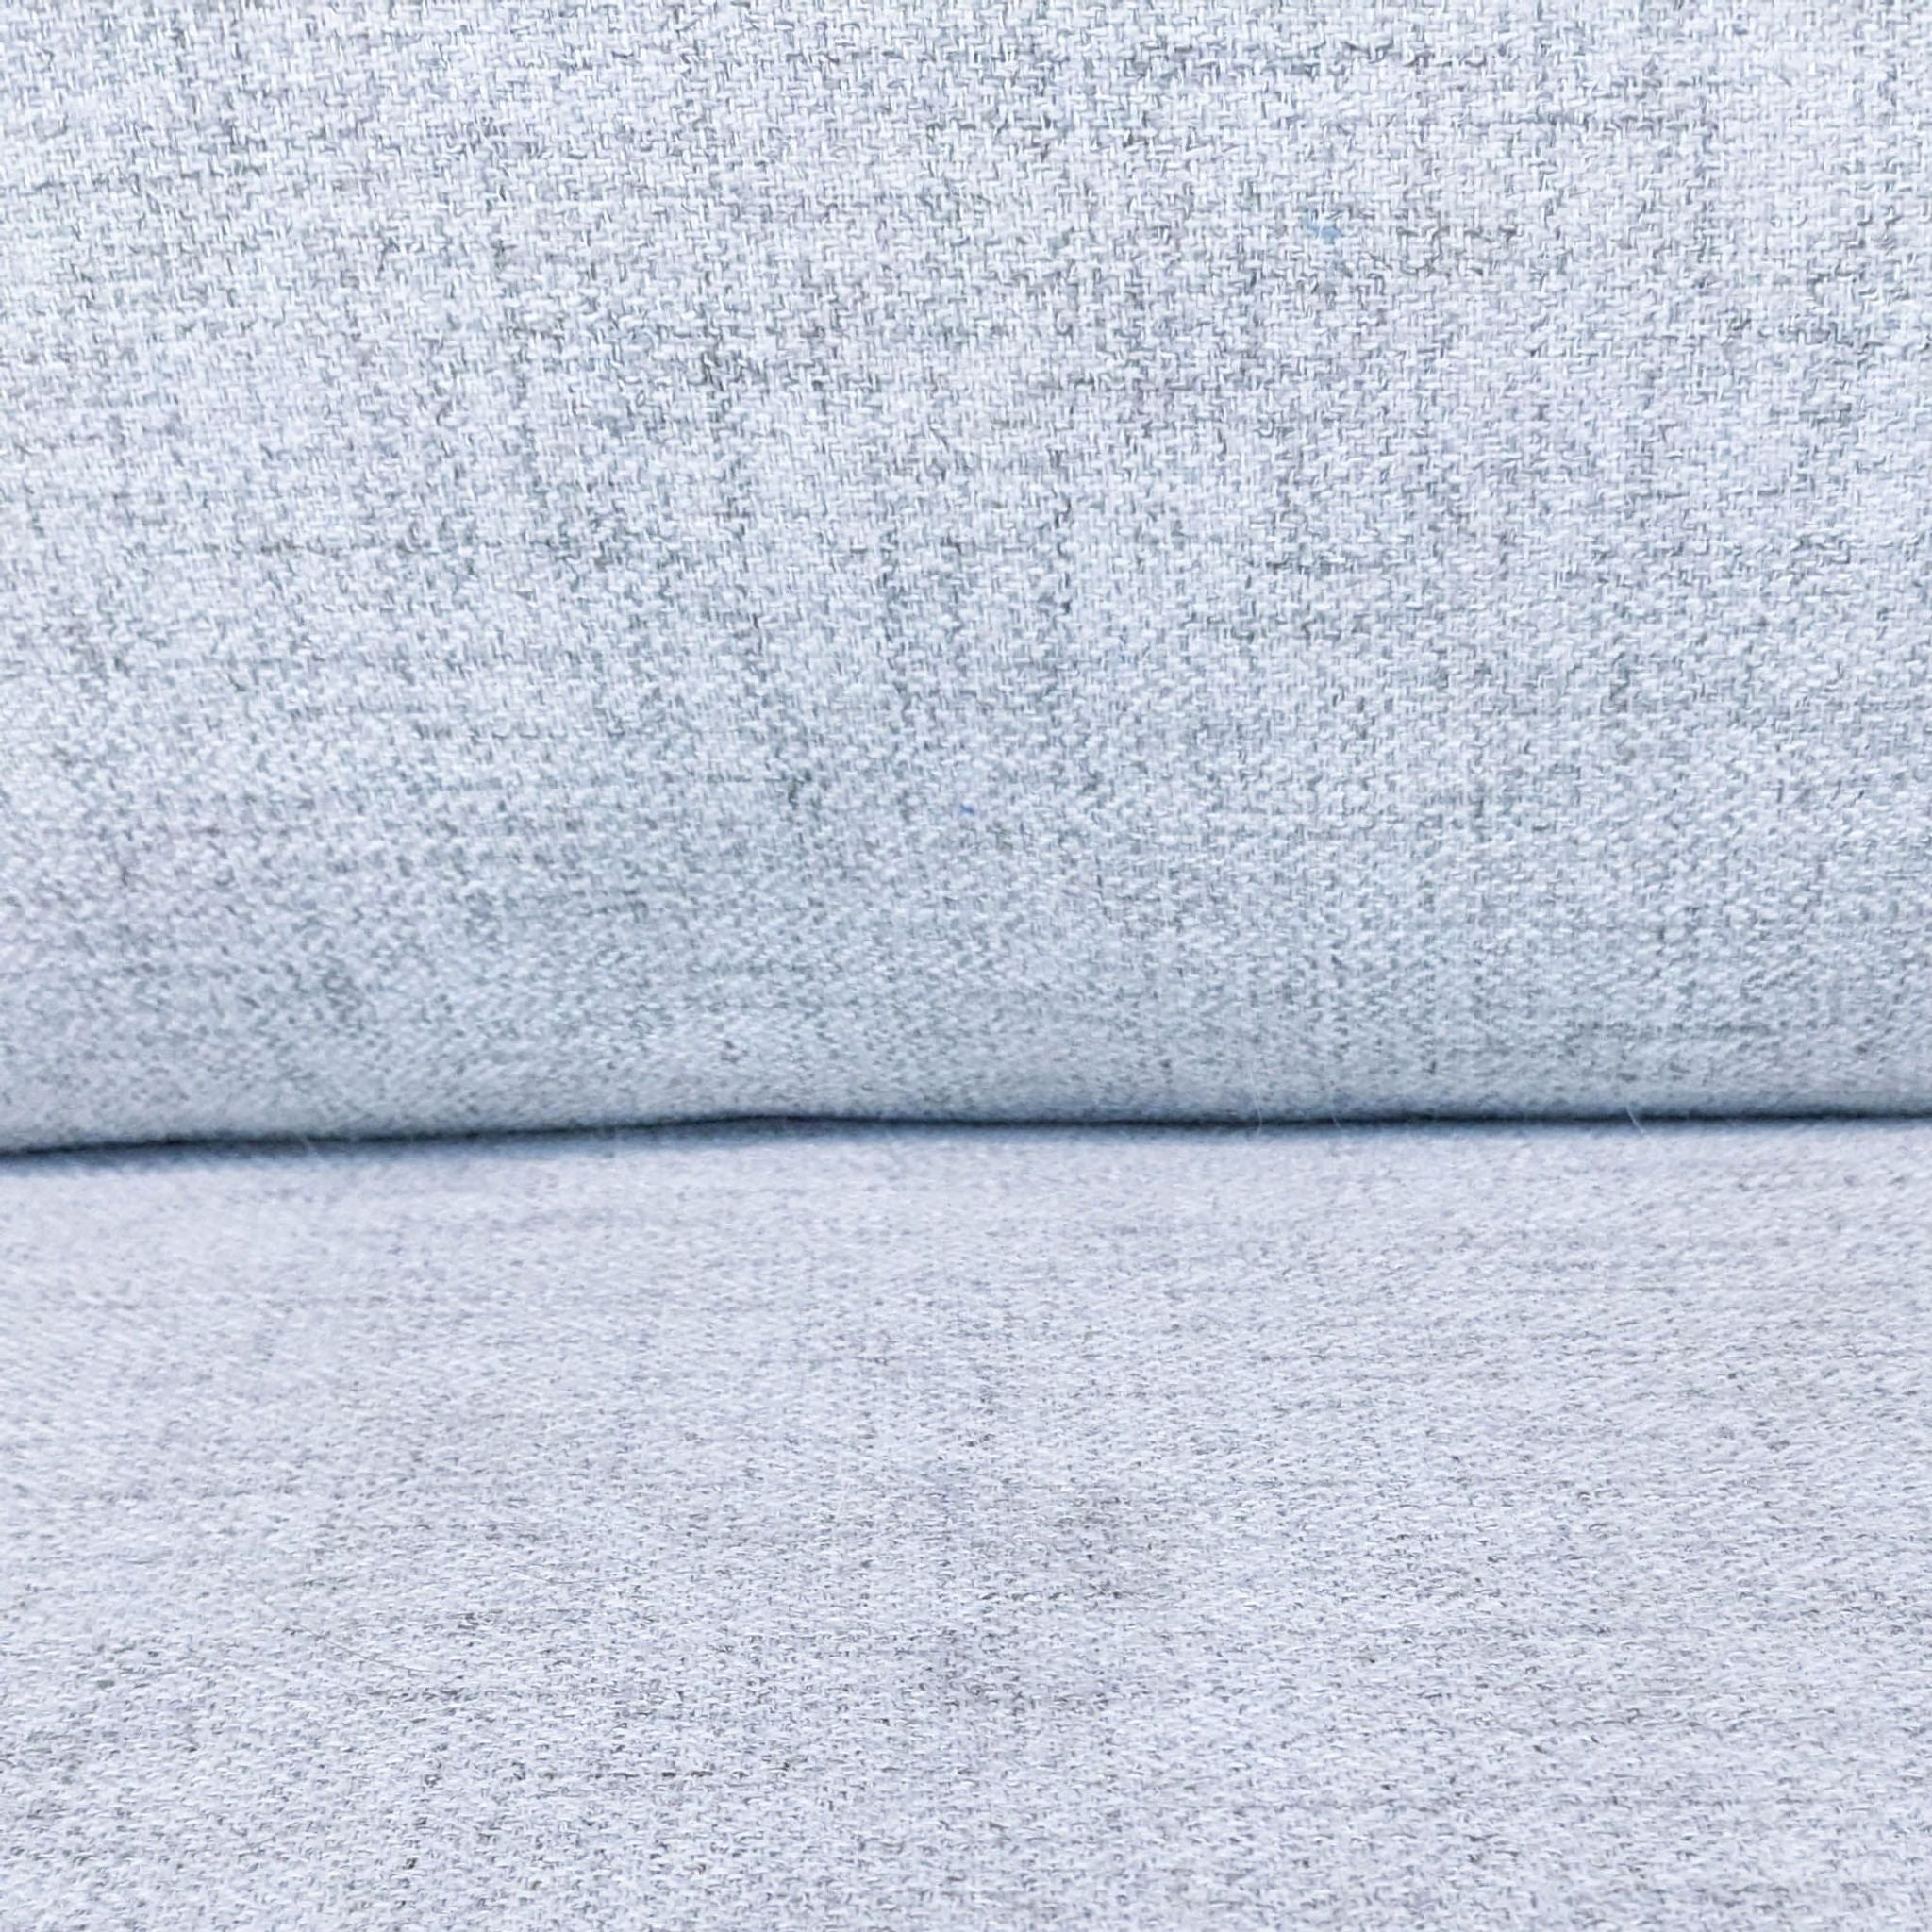 Close-up texture of a Reperch 3-seat sofa's gray fabric upholstery.